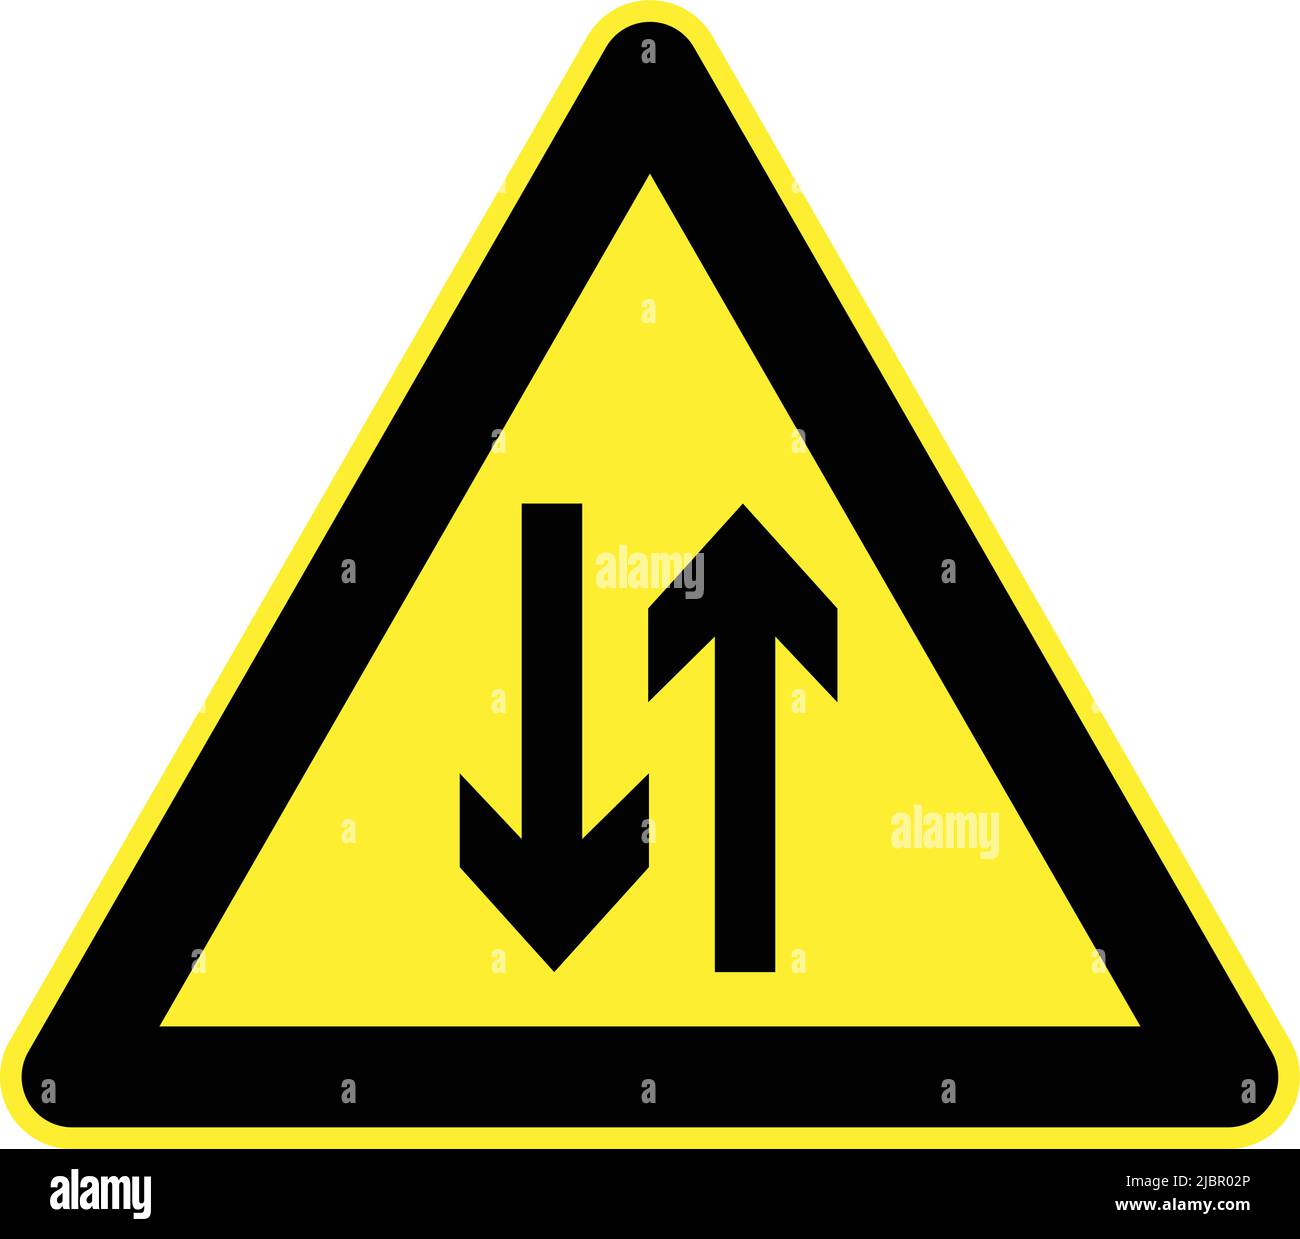 Warning signs, Road signs in China, A wide variety of road signs are displayed in the People's Republic of China. Two-way traffic ahead Stock Vector